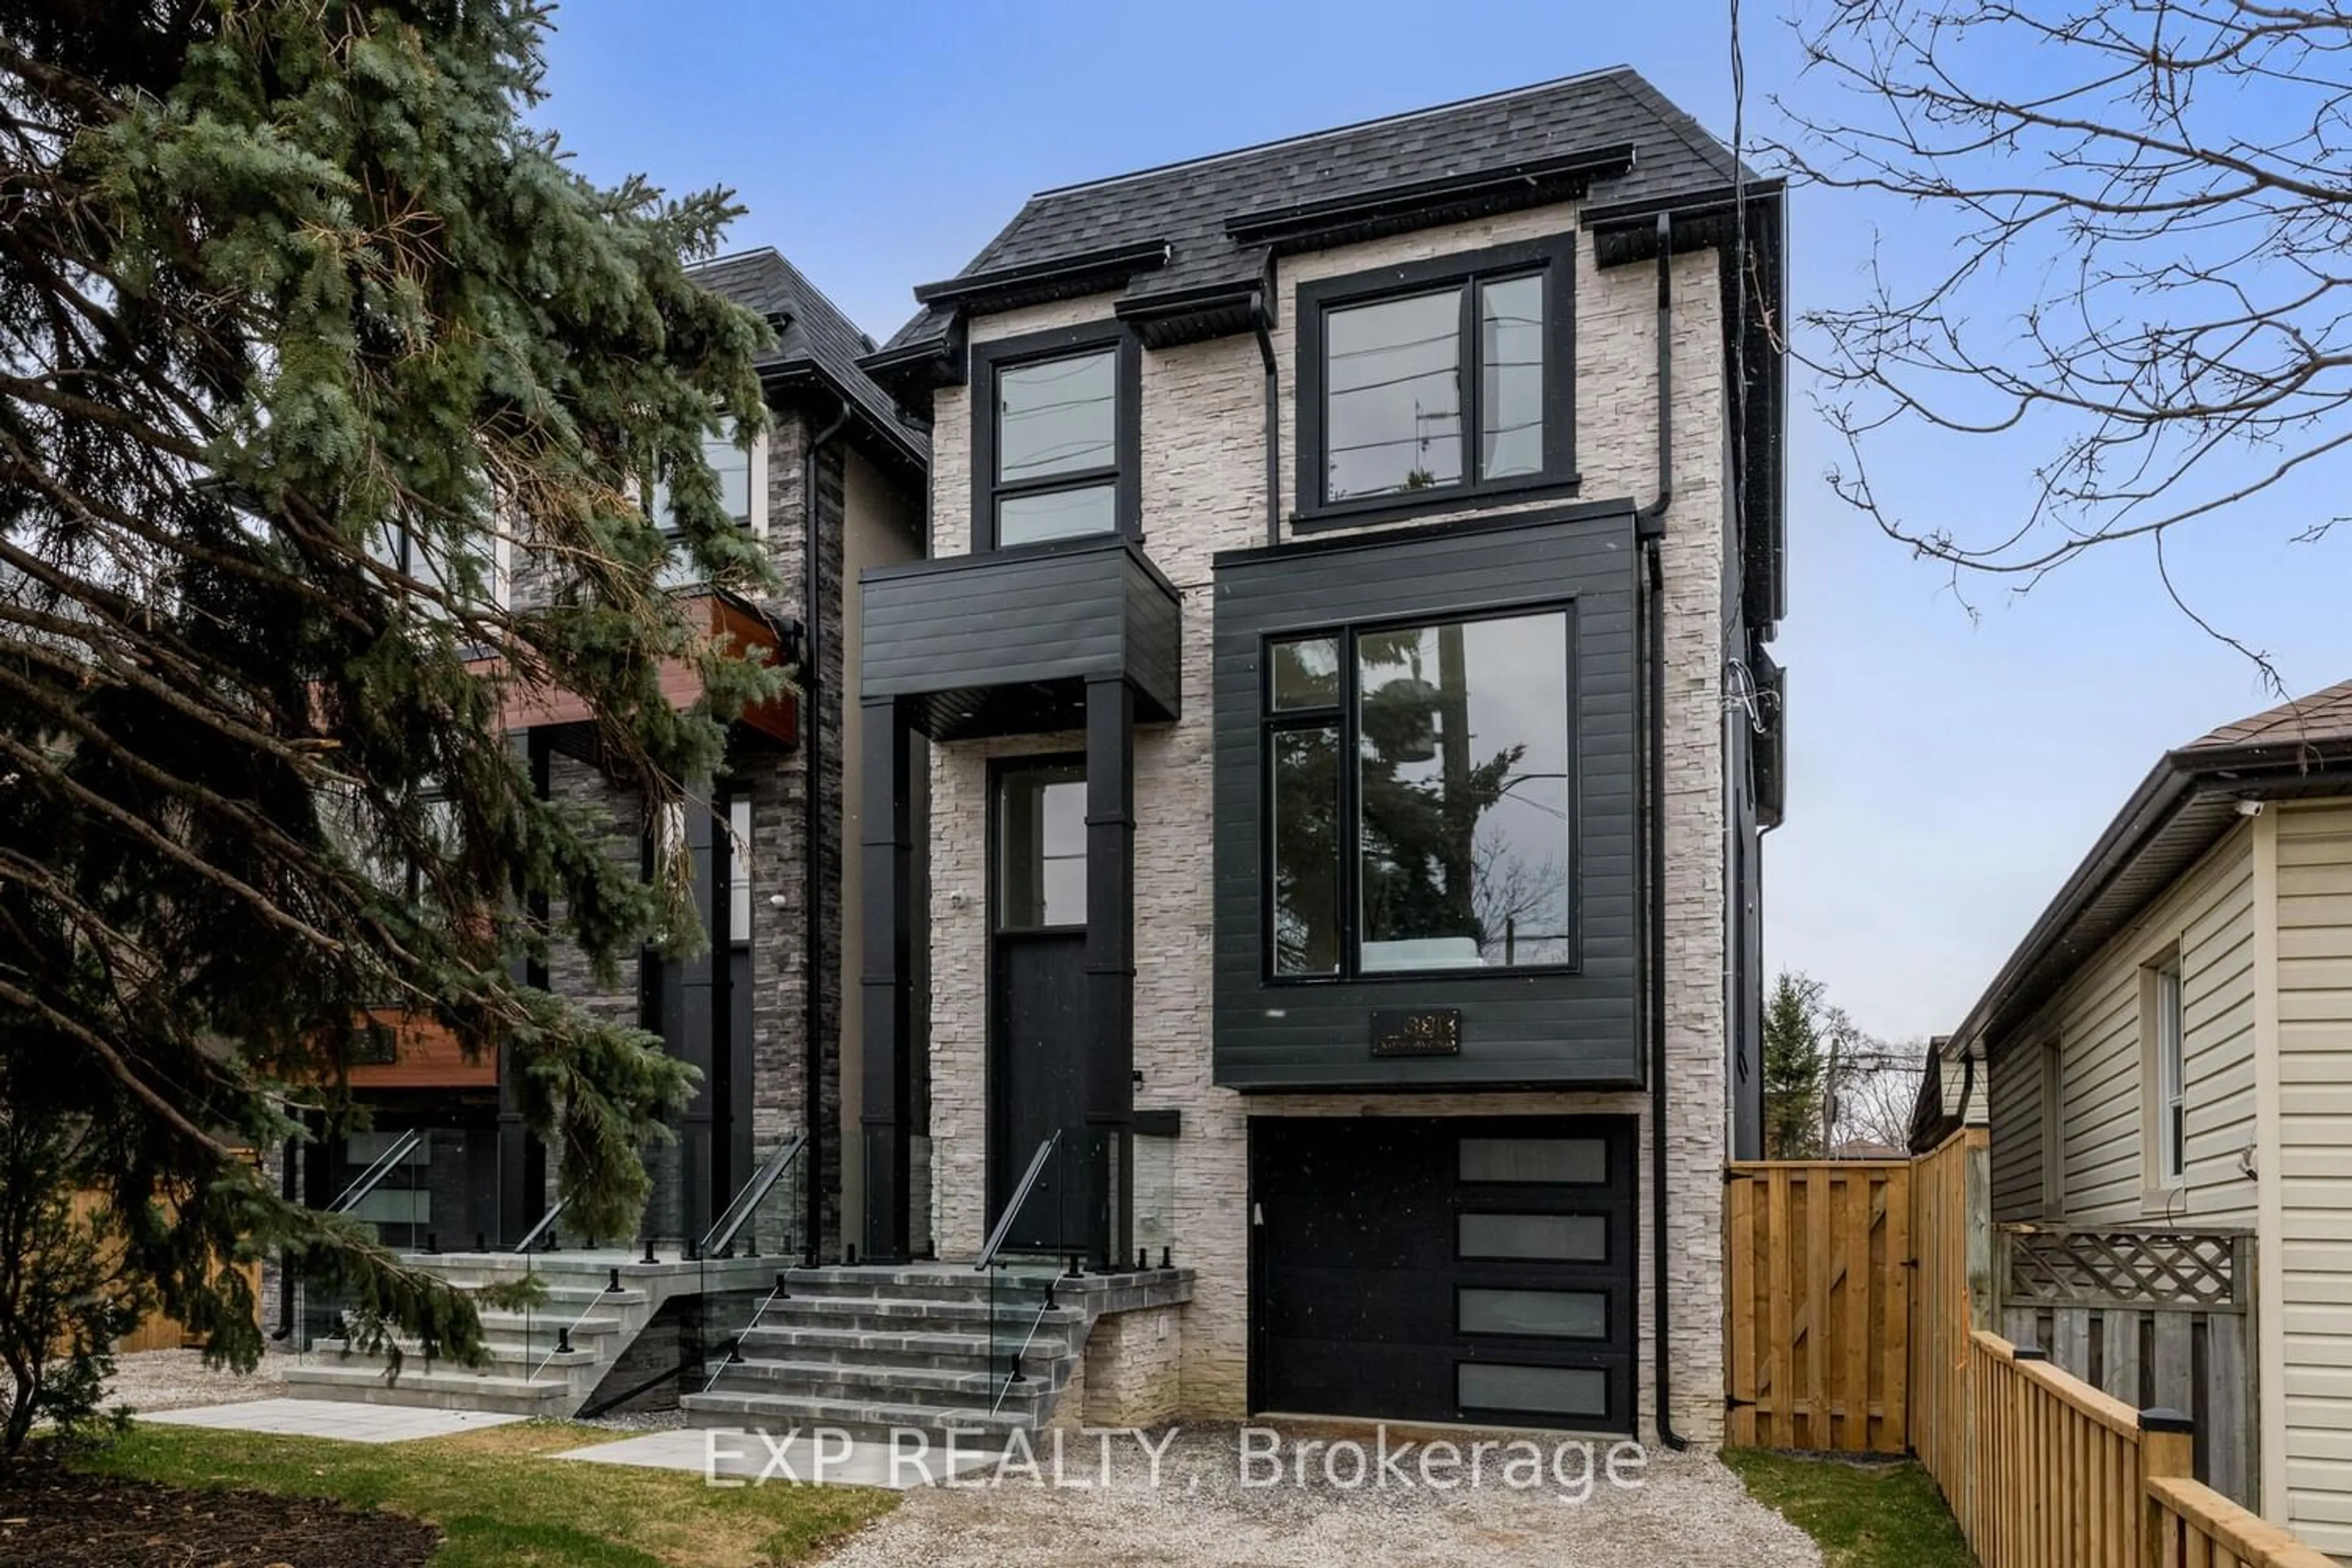 Home with brick exterior material for 39B Evans Ave, Toronto Ontario M8Z 1H4